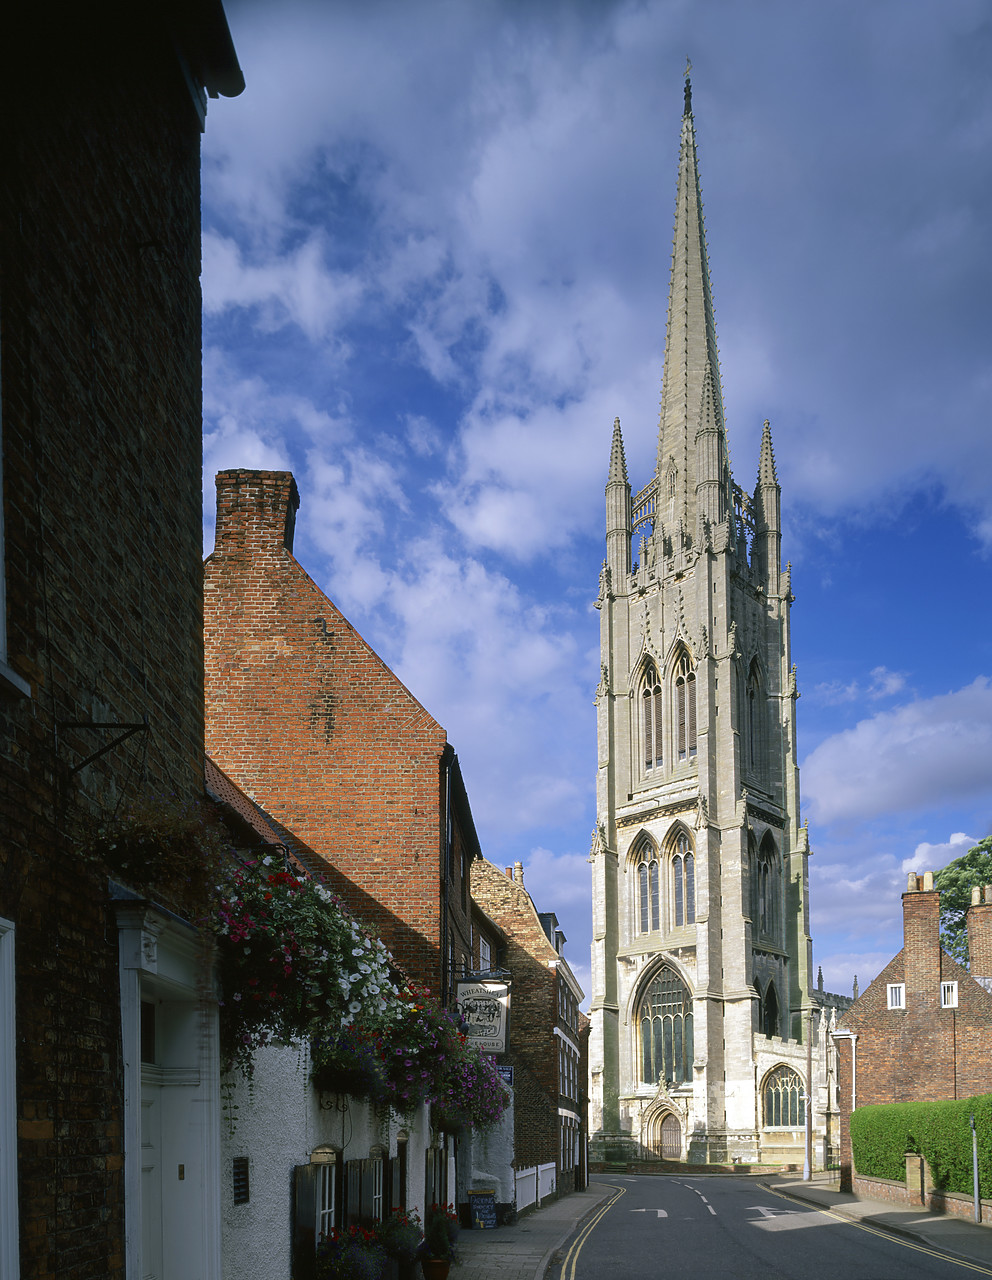 #970351-2 - Church of St. James, Louth, Lincolnshire, England